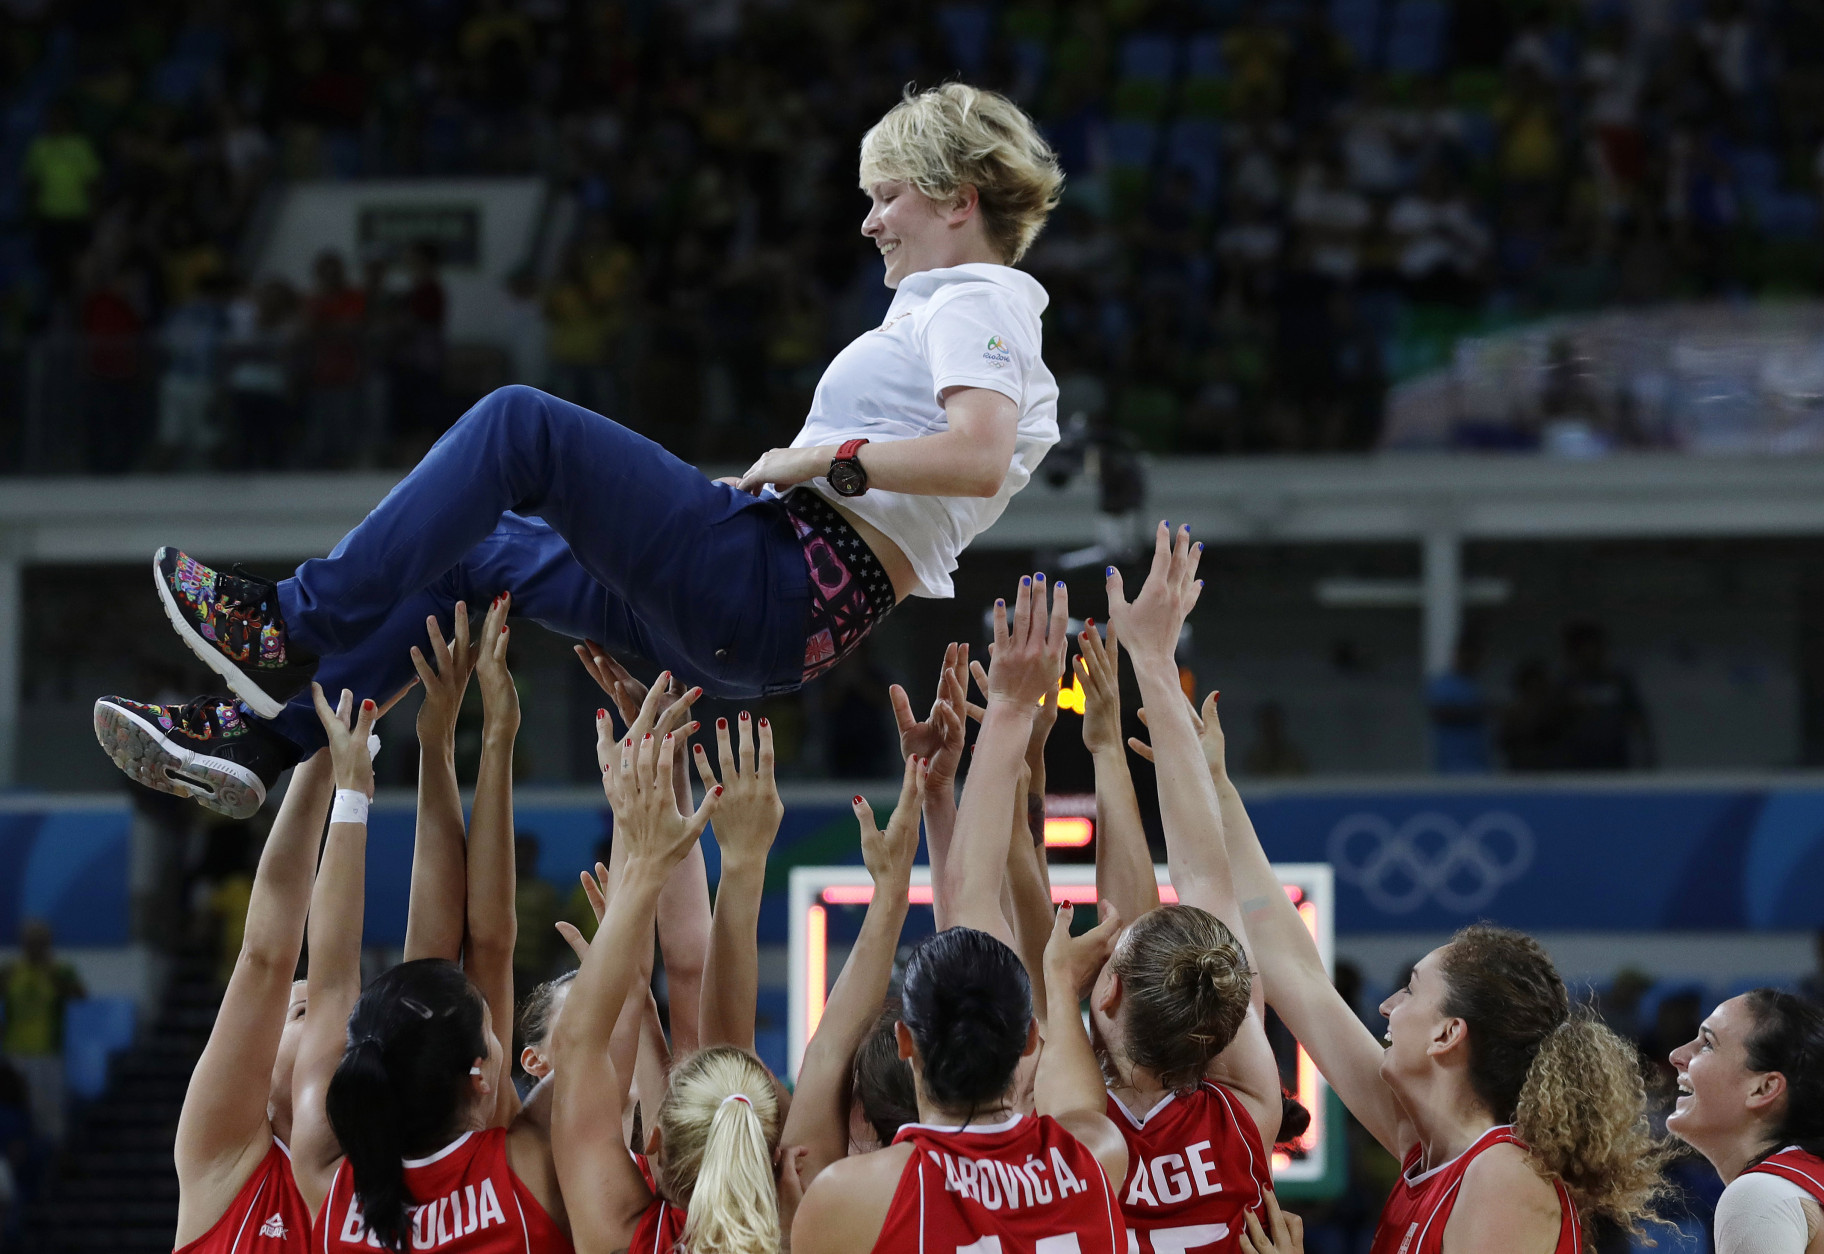 Serbia head coach Marina Maljkovic is tossed in the air by her players after they defeated France in the women's bronze medal basketball game at the 2016 Summer Olympics in Rio de Janeiro, Brazil, Saturday, Aug. 20, 2016. (AP Photo/Eric Gay)